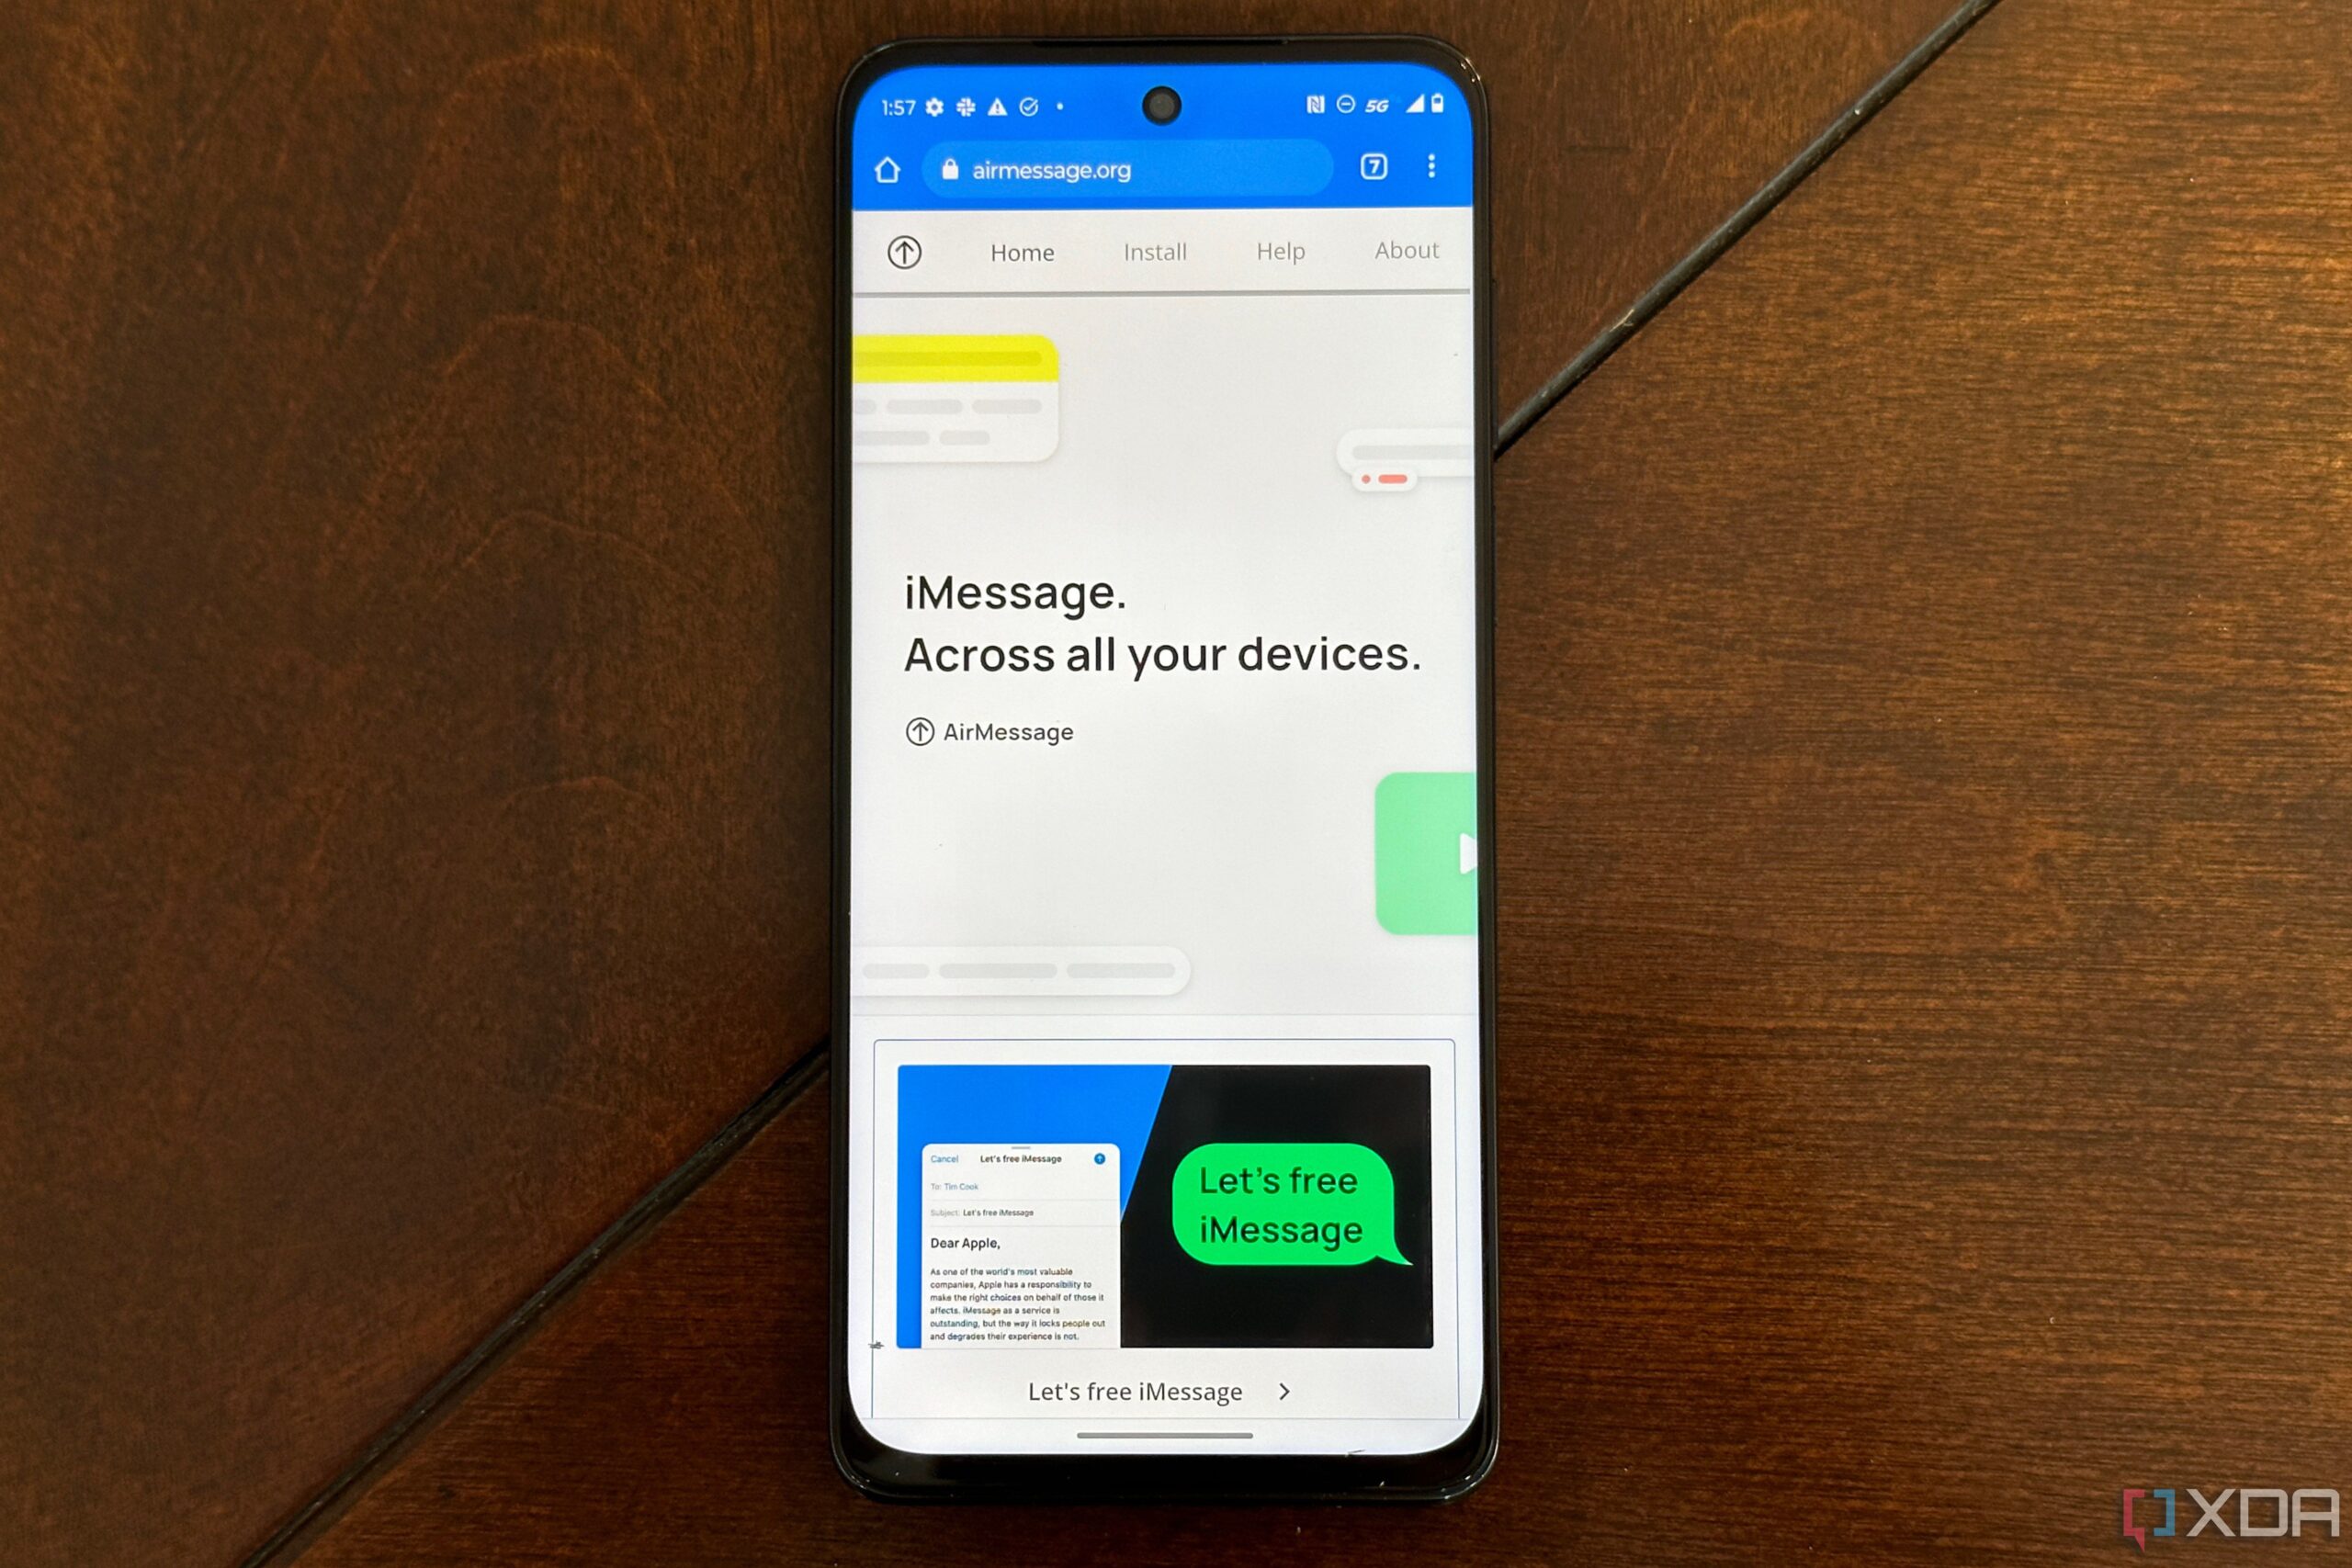 How to use iMessage on Android with AirMessage